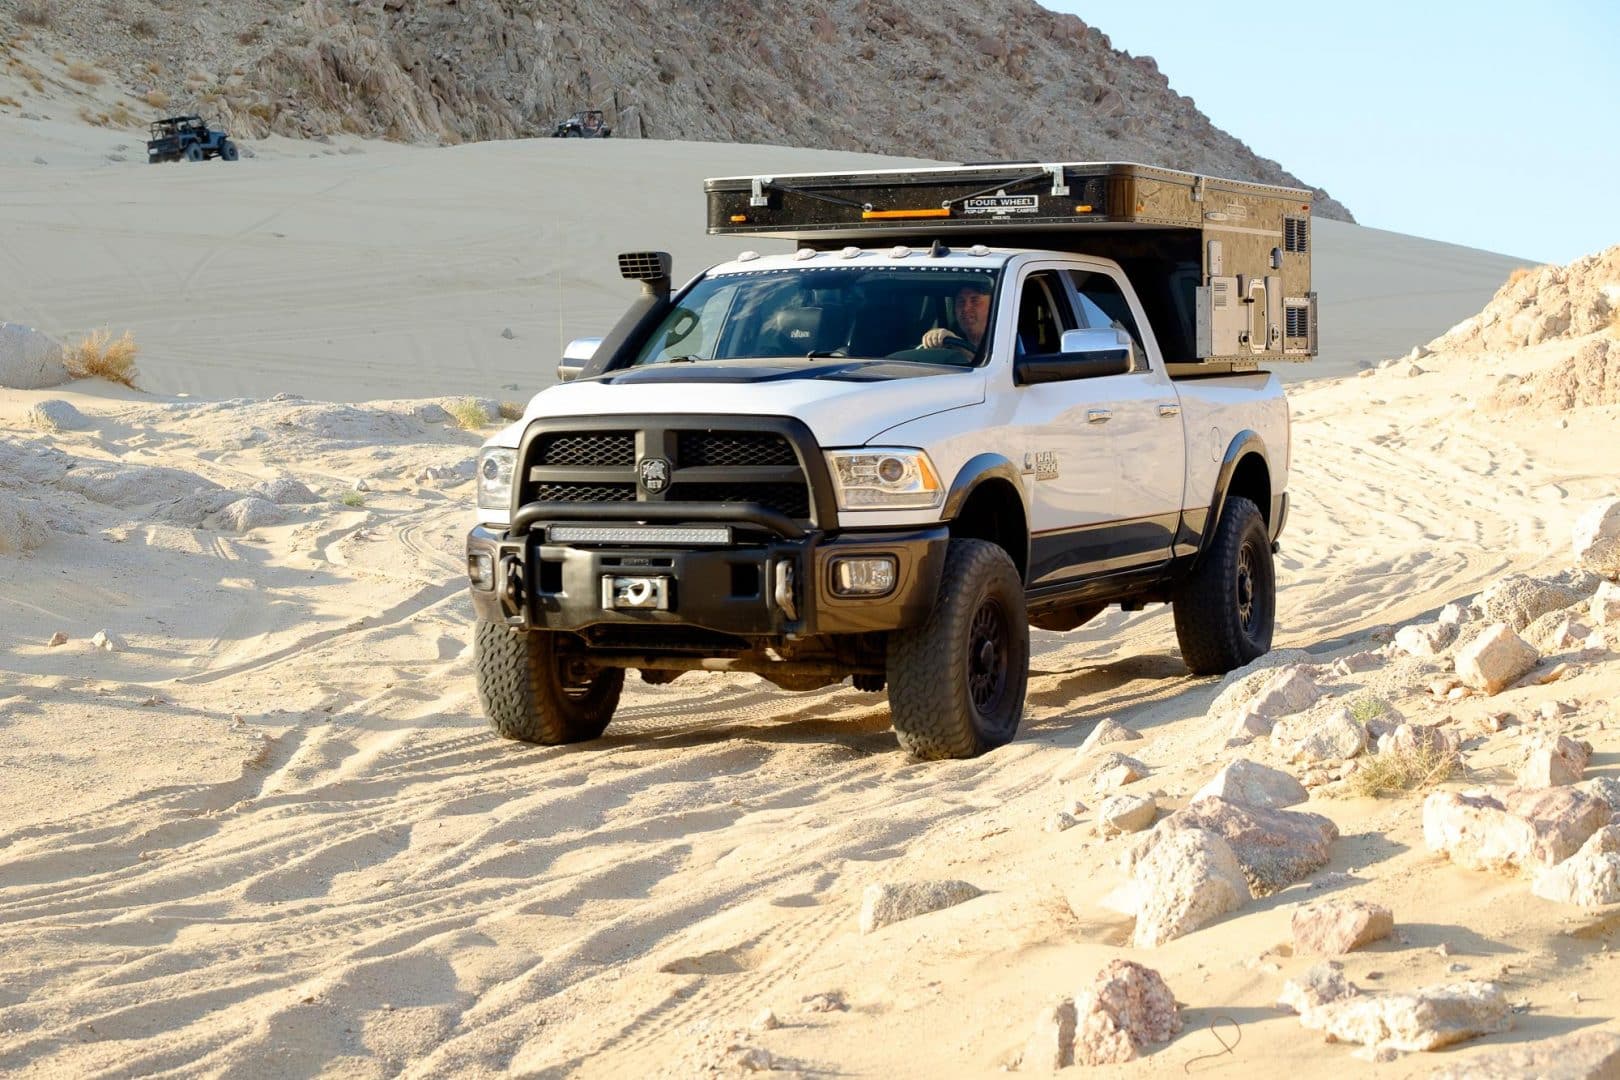 7th Annual Four Wheel Campers Customer Rally & Campout: Anza Borrego